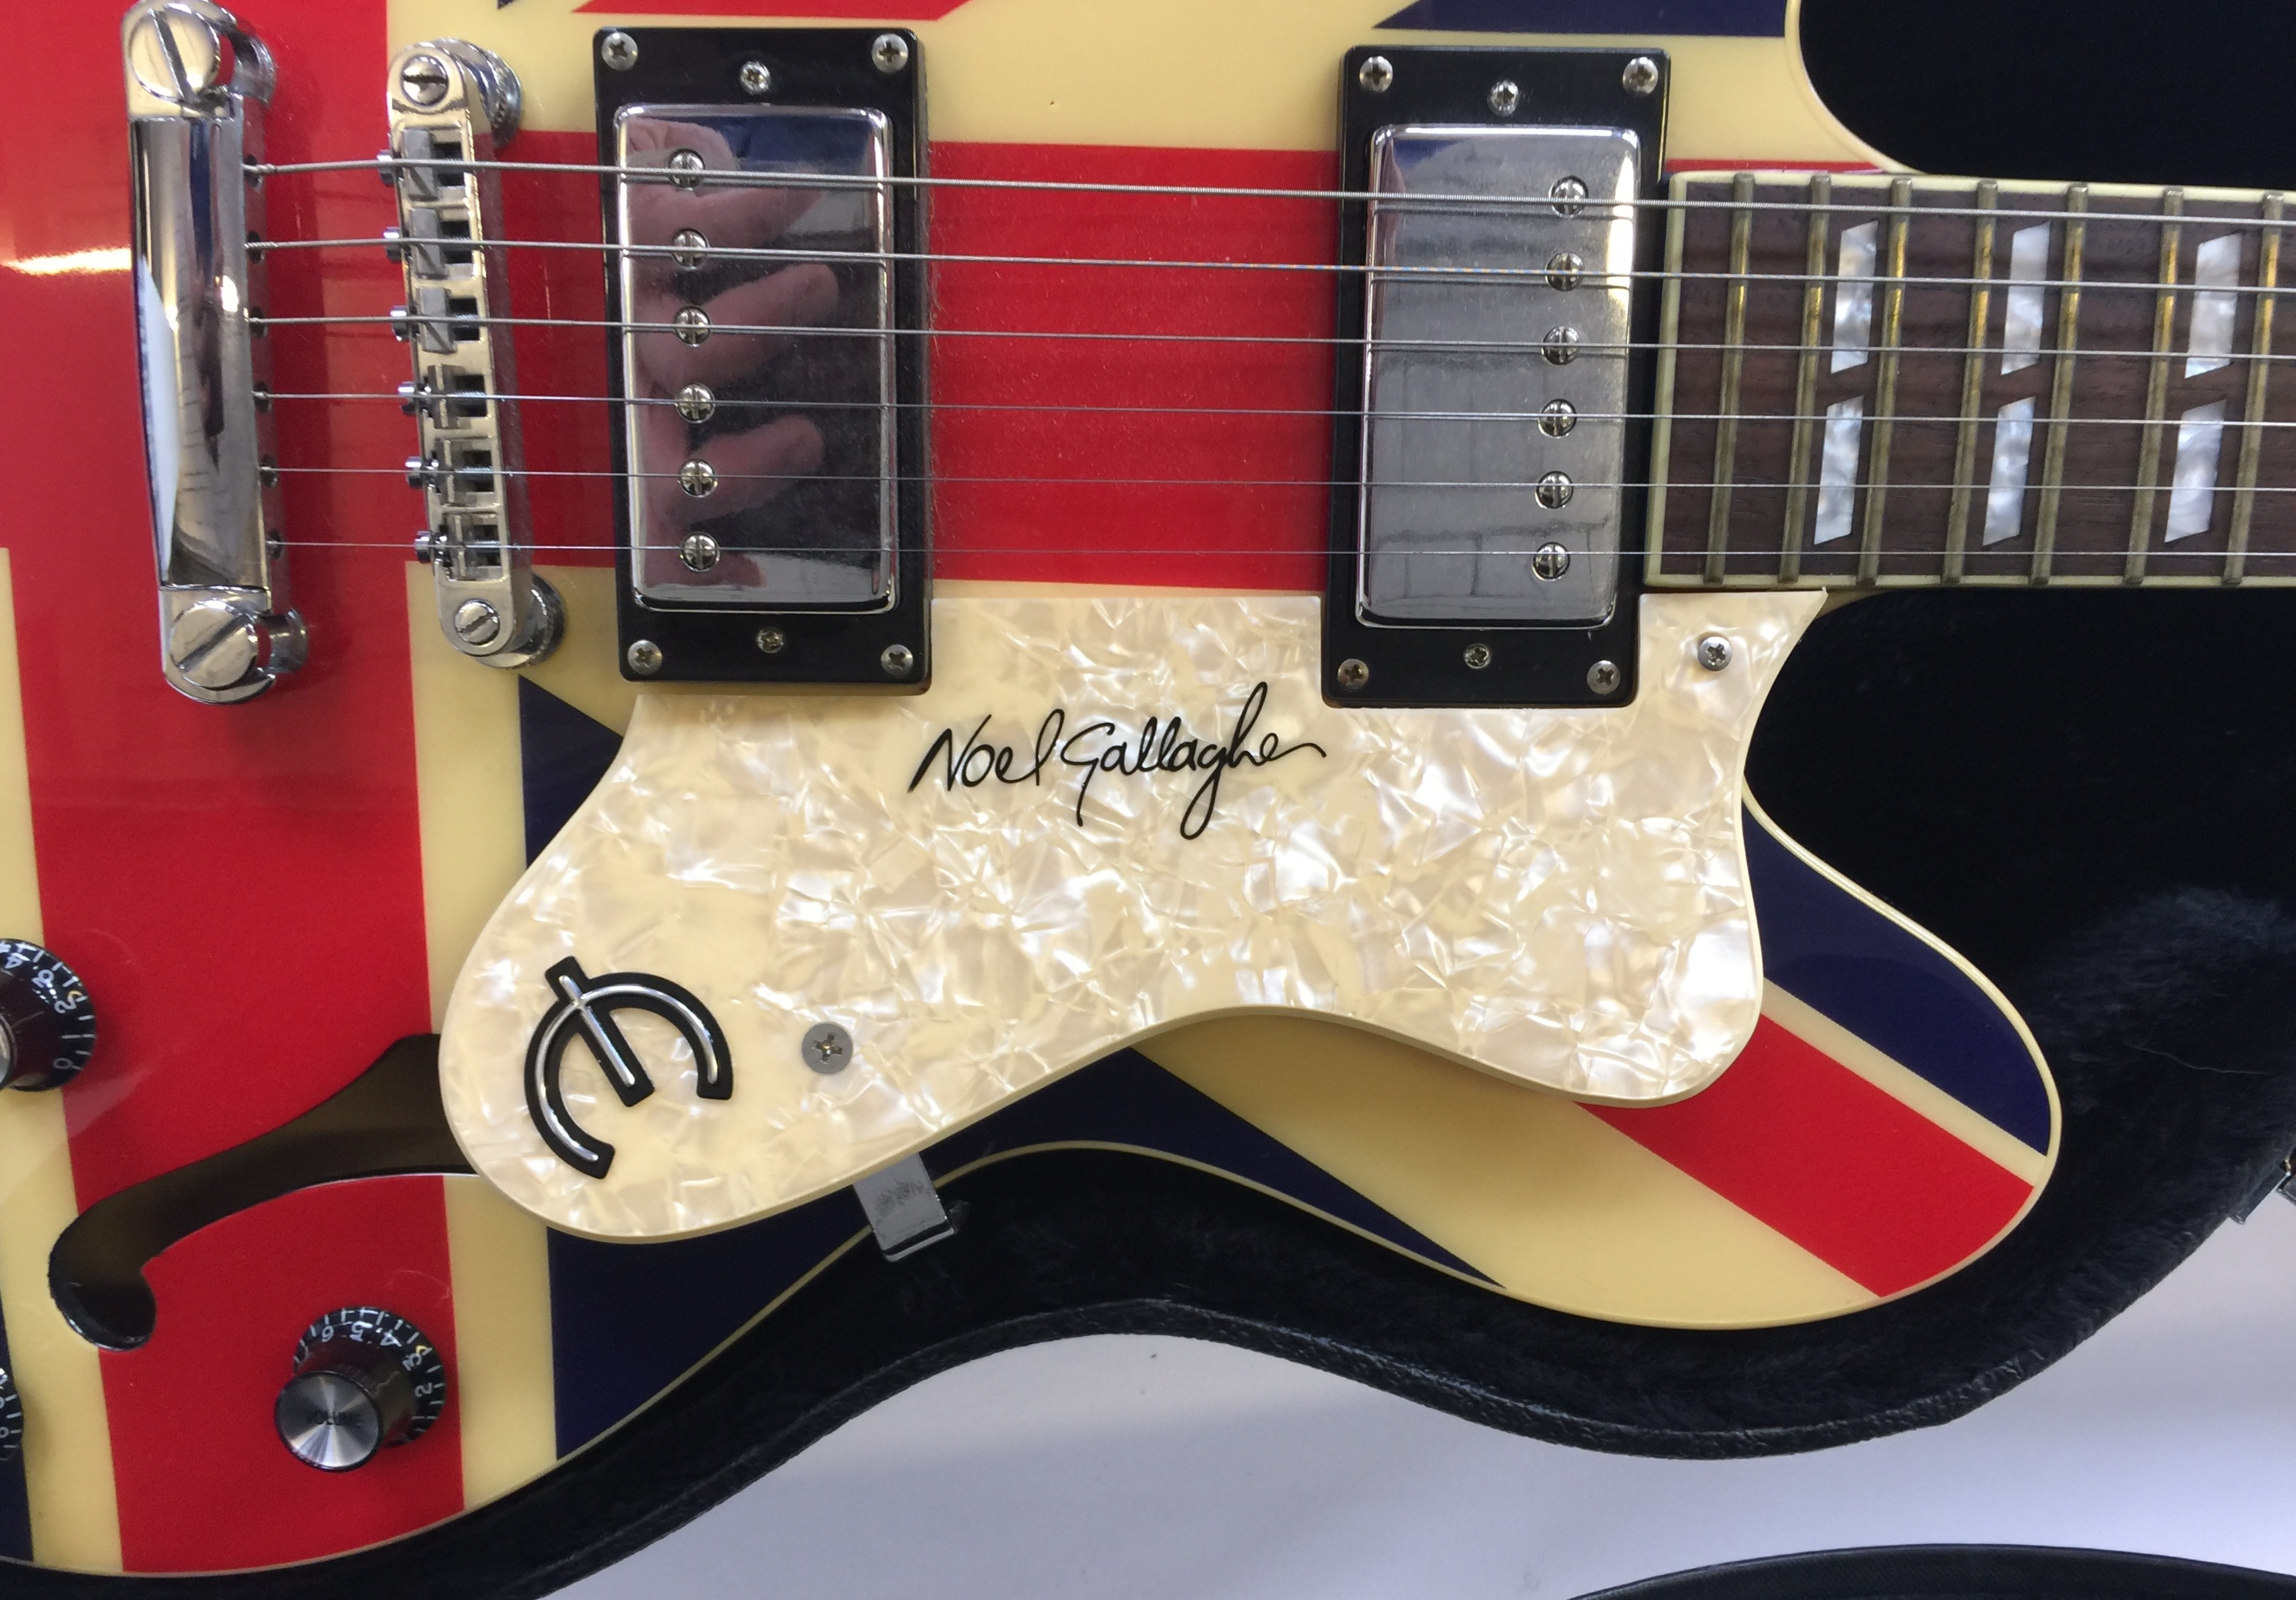 EPIPHONE NOEL GALLAGHER SUPERNOVA - electric guitar - a must for any guitar playing Oasis fan! - Image 7 of 8